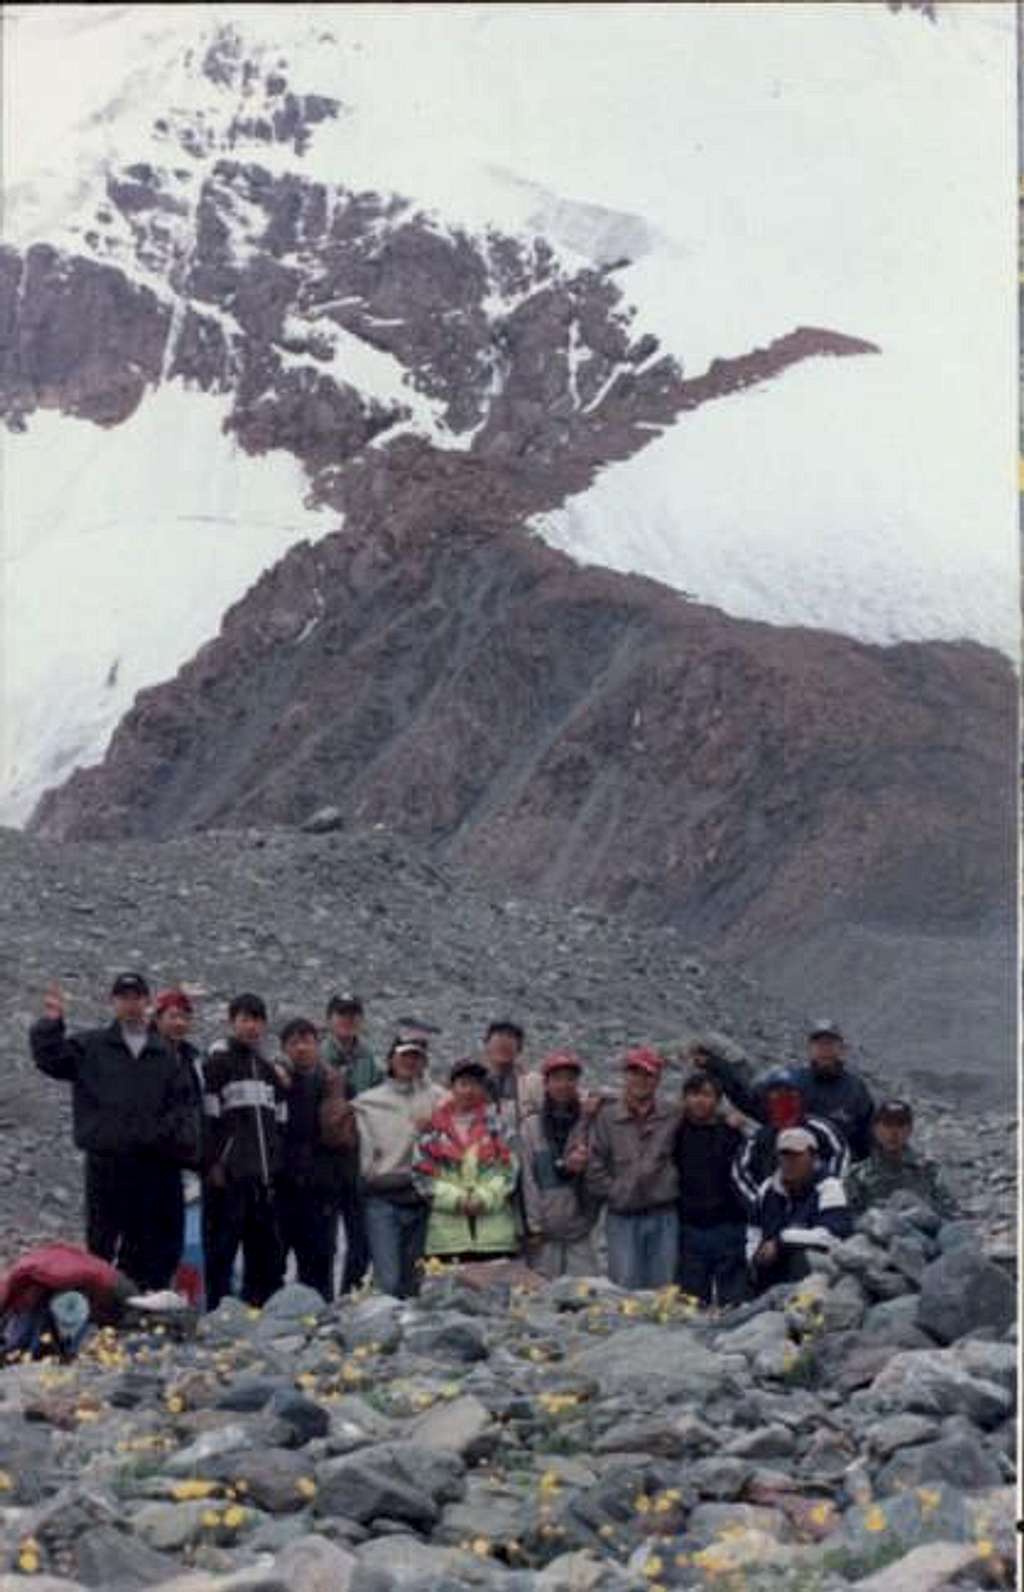 Our team at XIfeng Base Camp.